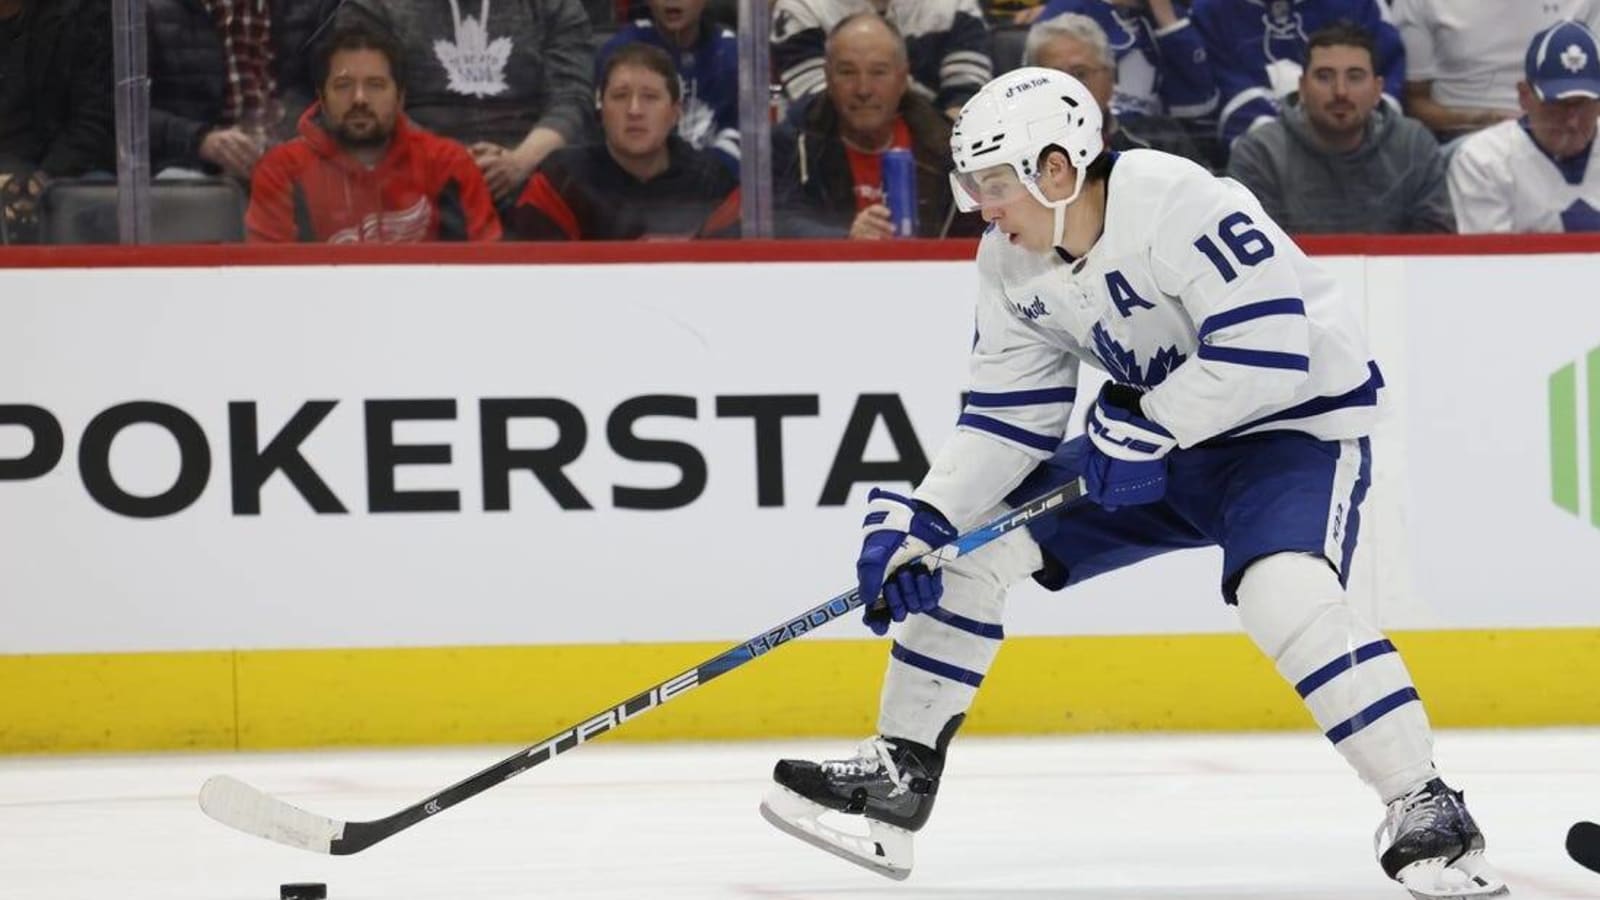 As Sharks visit, Mitchell Marner goes for Maple Leafs’ record